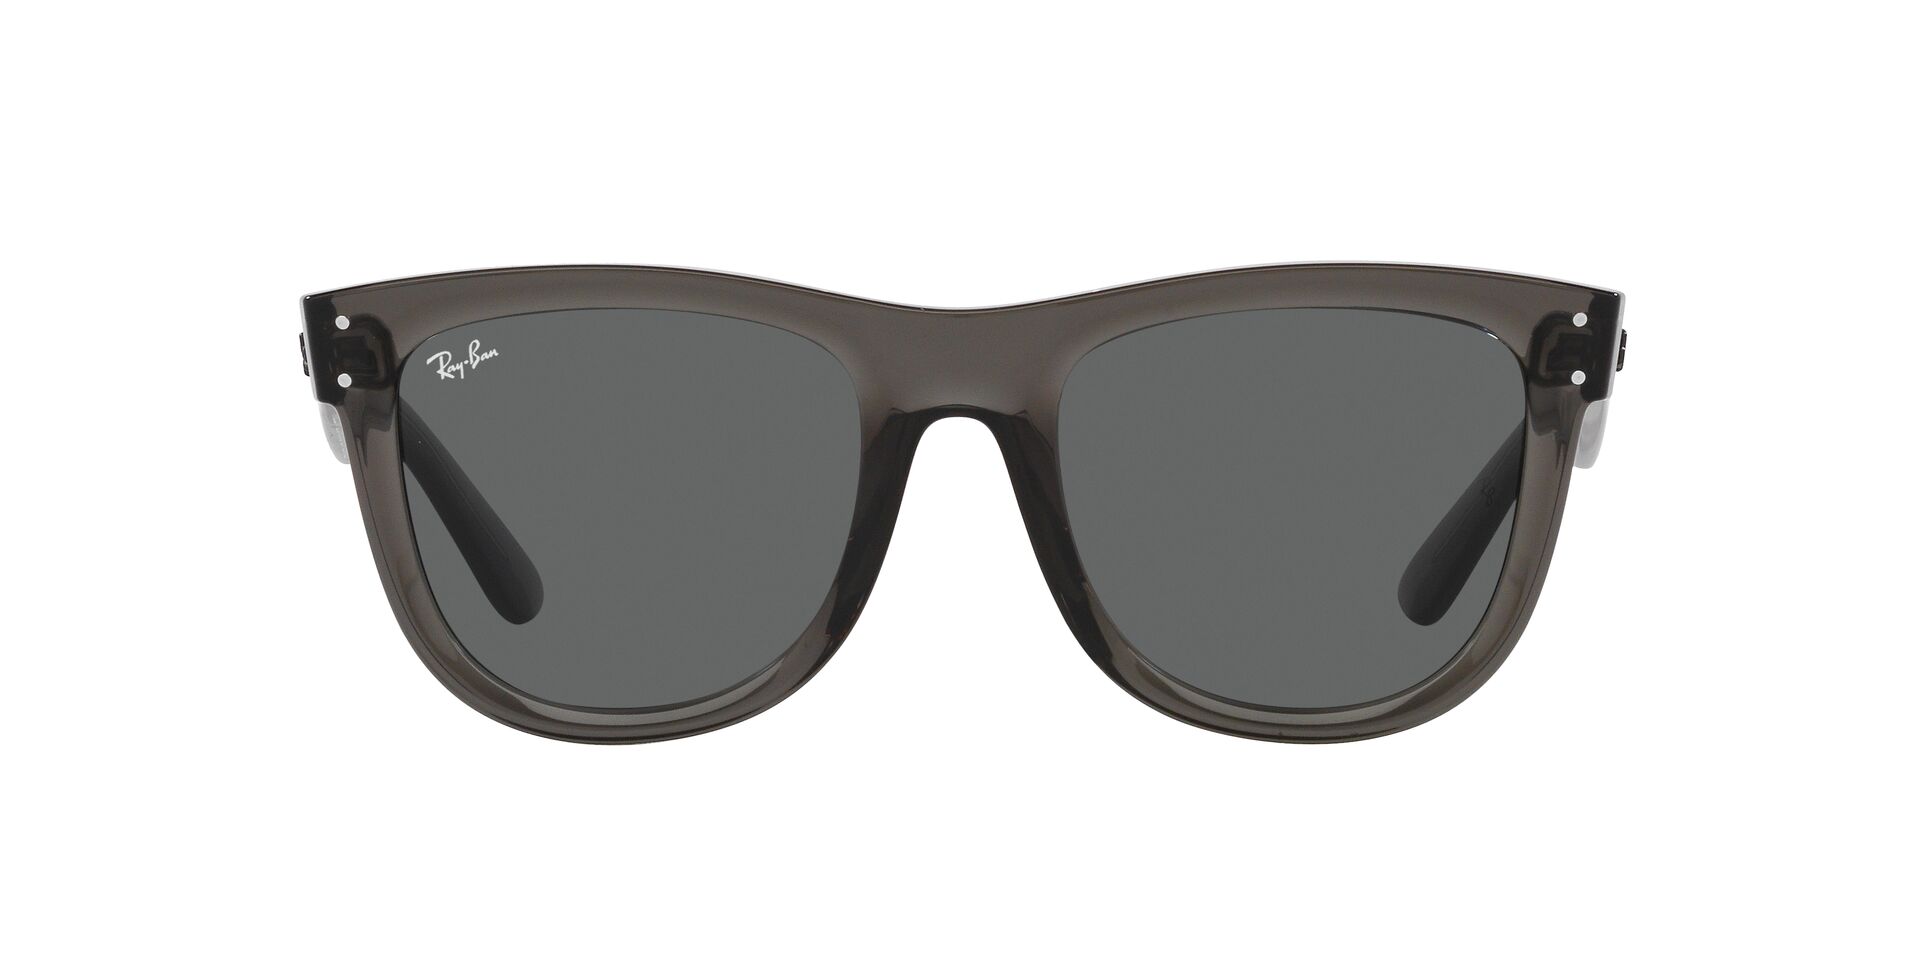 Facebook aims for your face with Ray-Ban Stories smart glasses